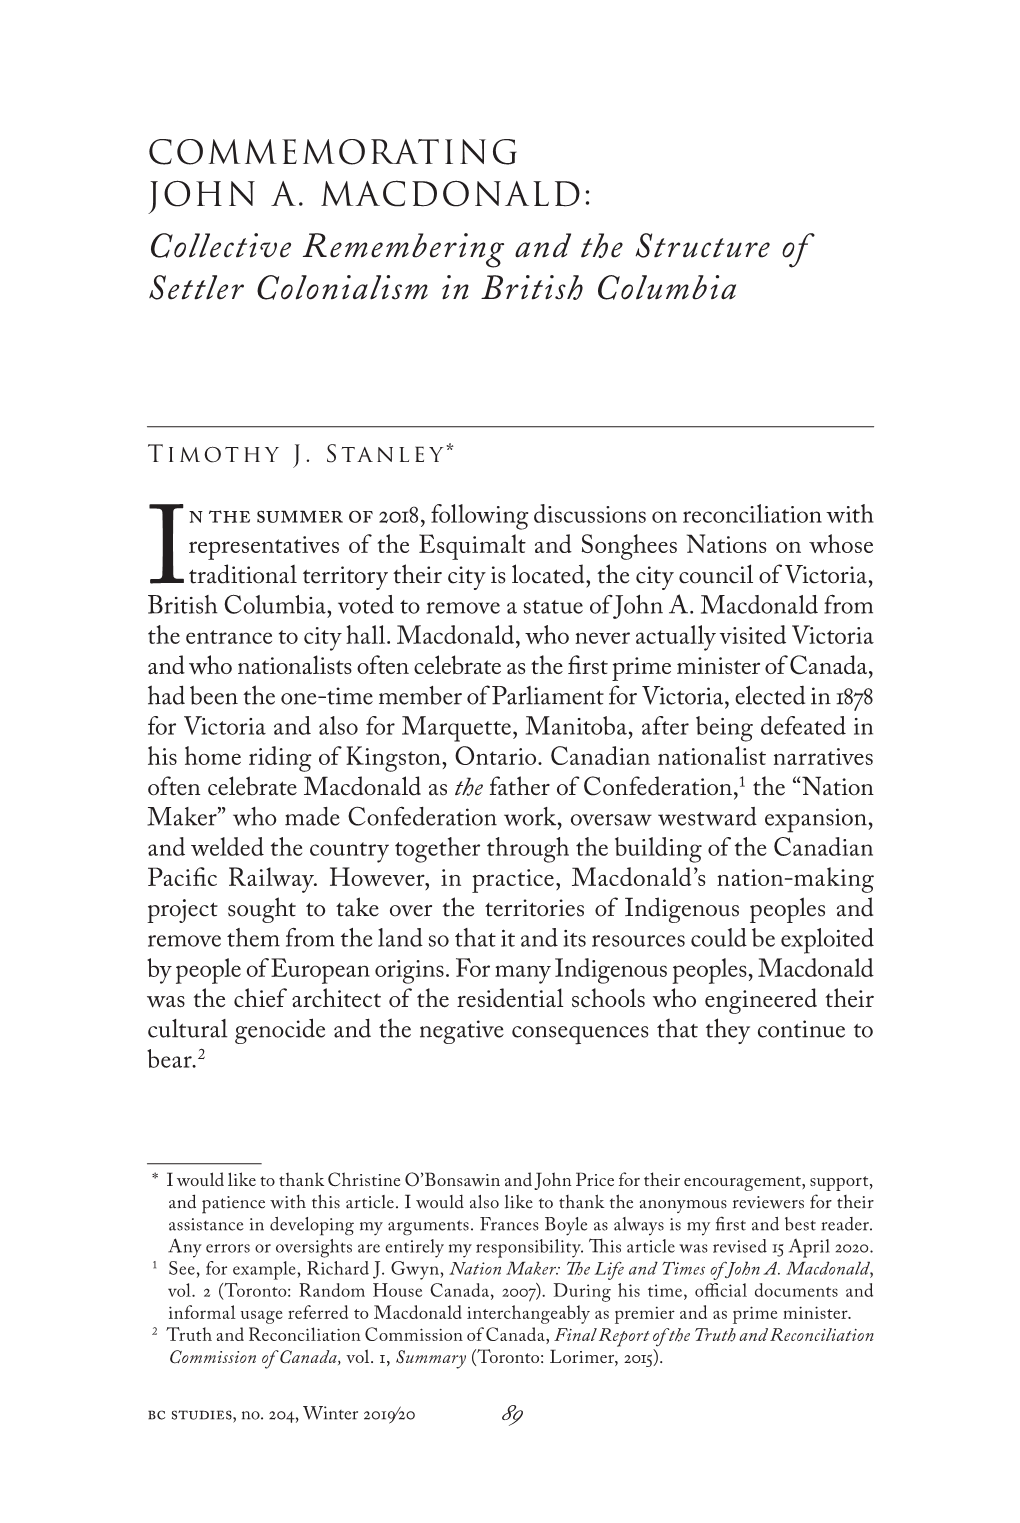 Collective Remembering and the Structure of Settler Colonialism in British Columbia